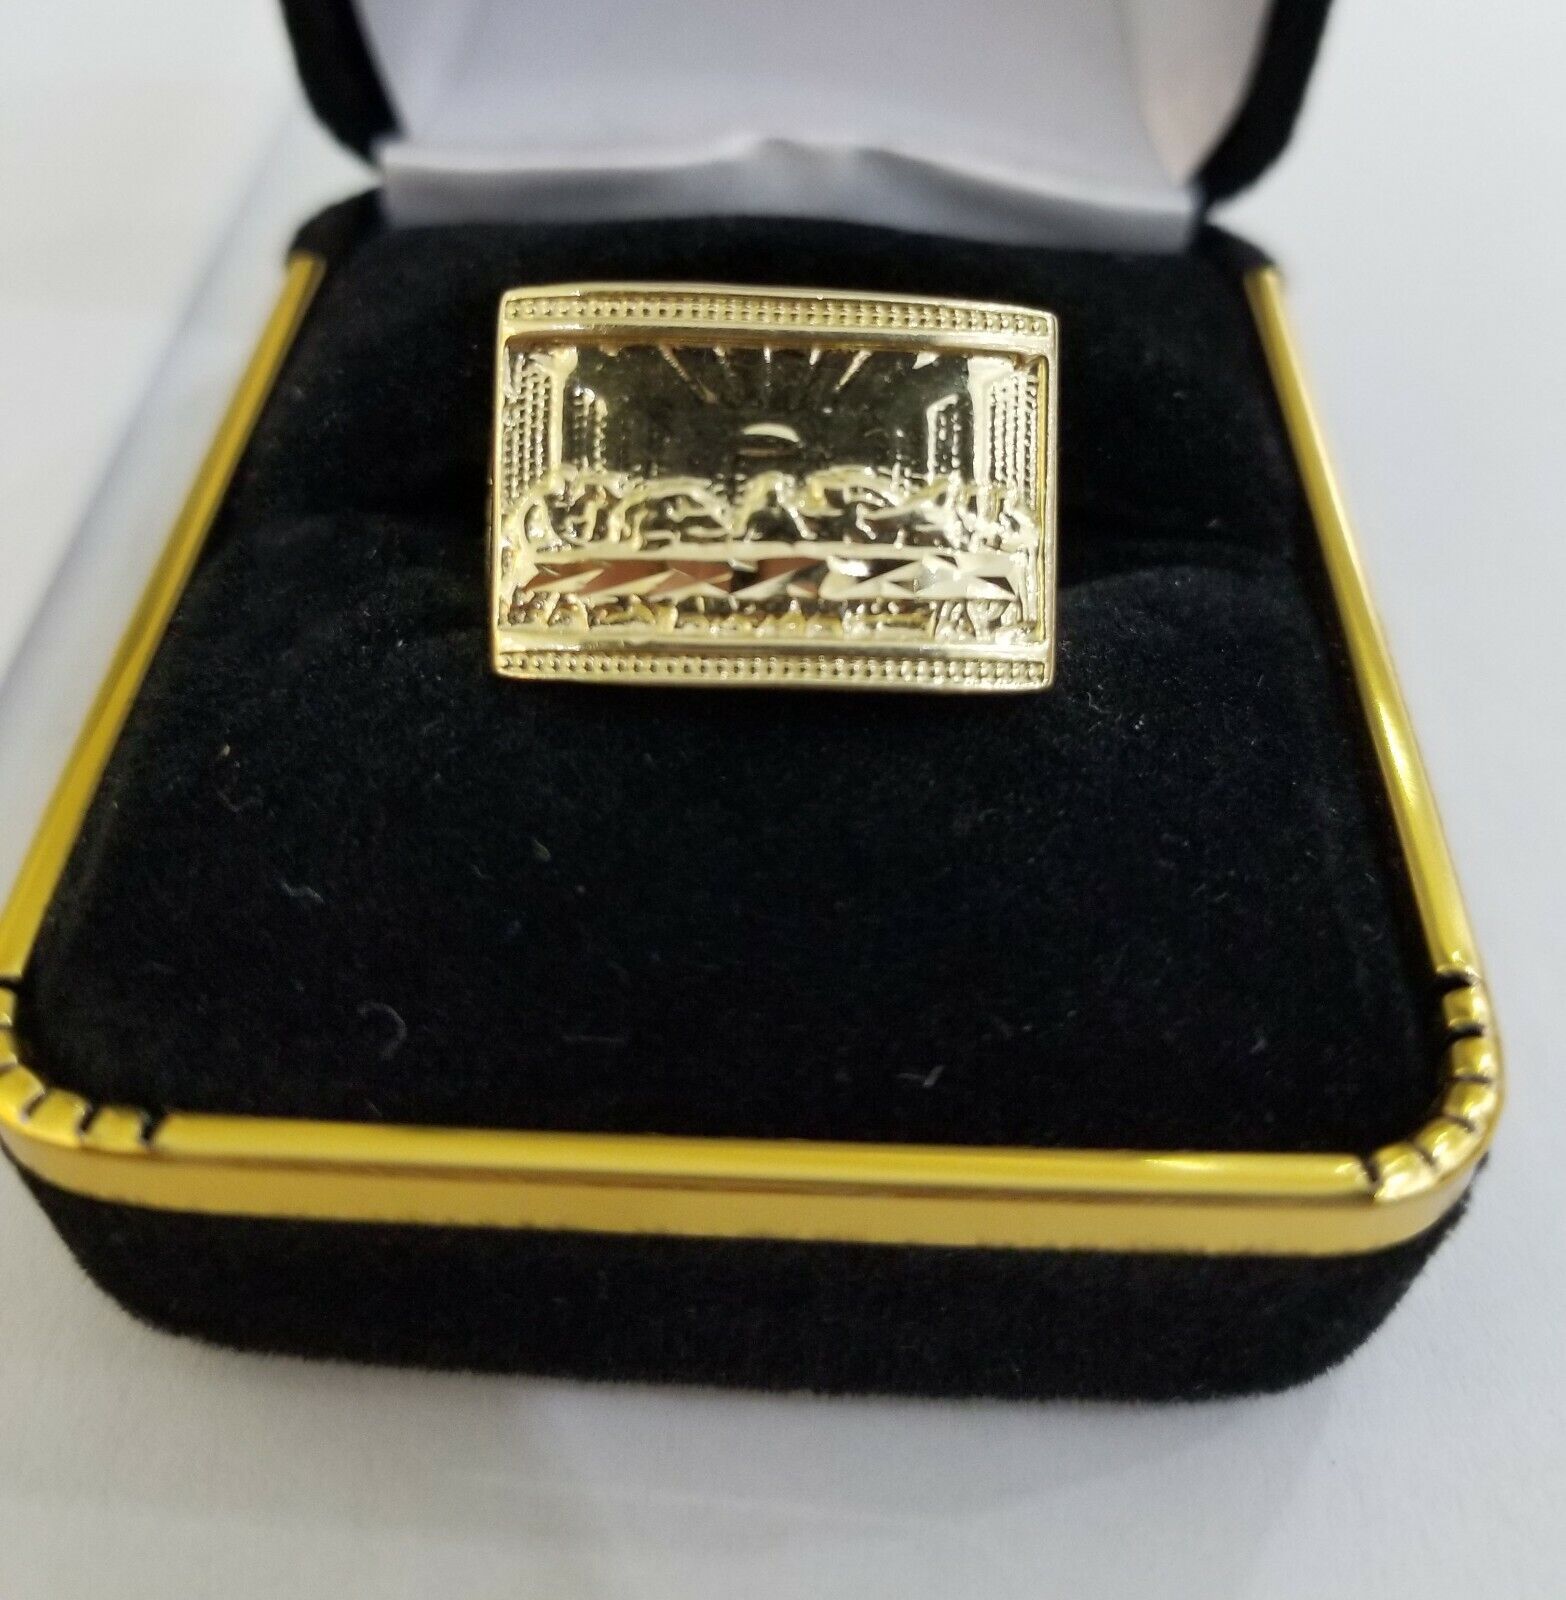 10k Real Yellow Gold Last Supper Ring Men Ring Size 10 Sizable Cross design